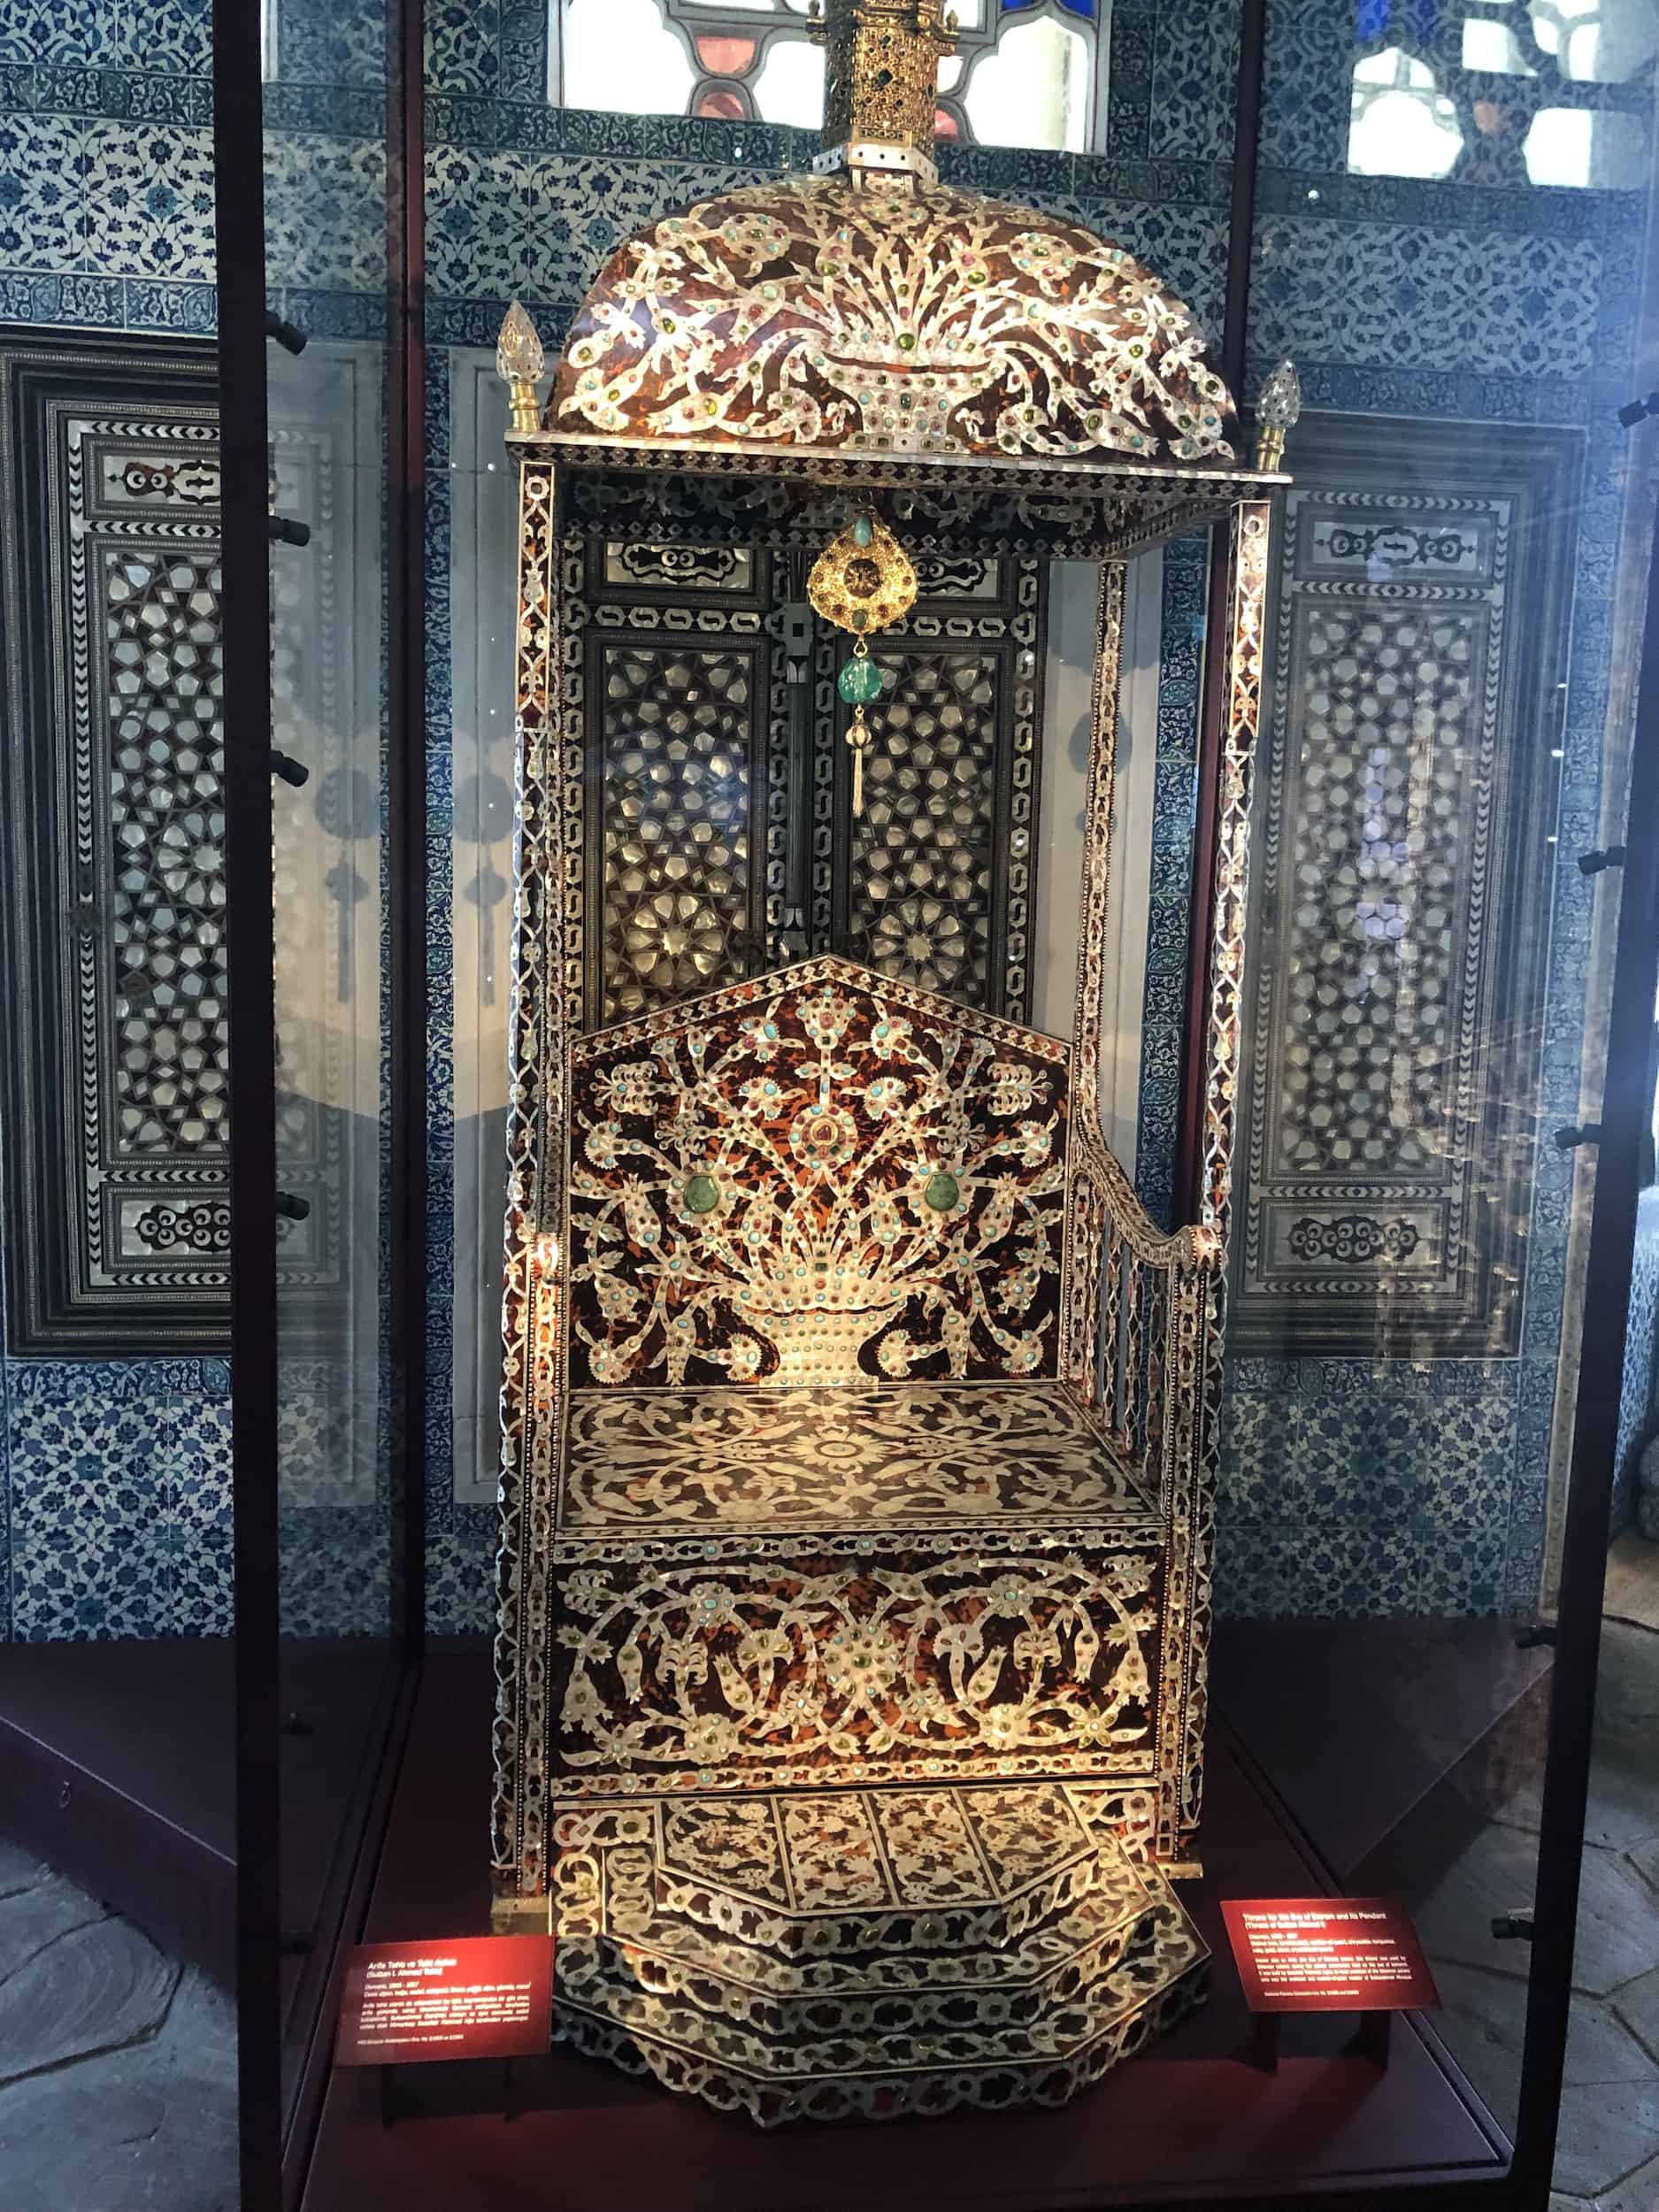 Throne of Sultan Ahmed I